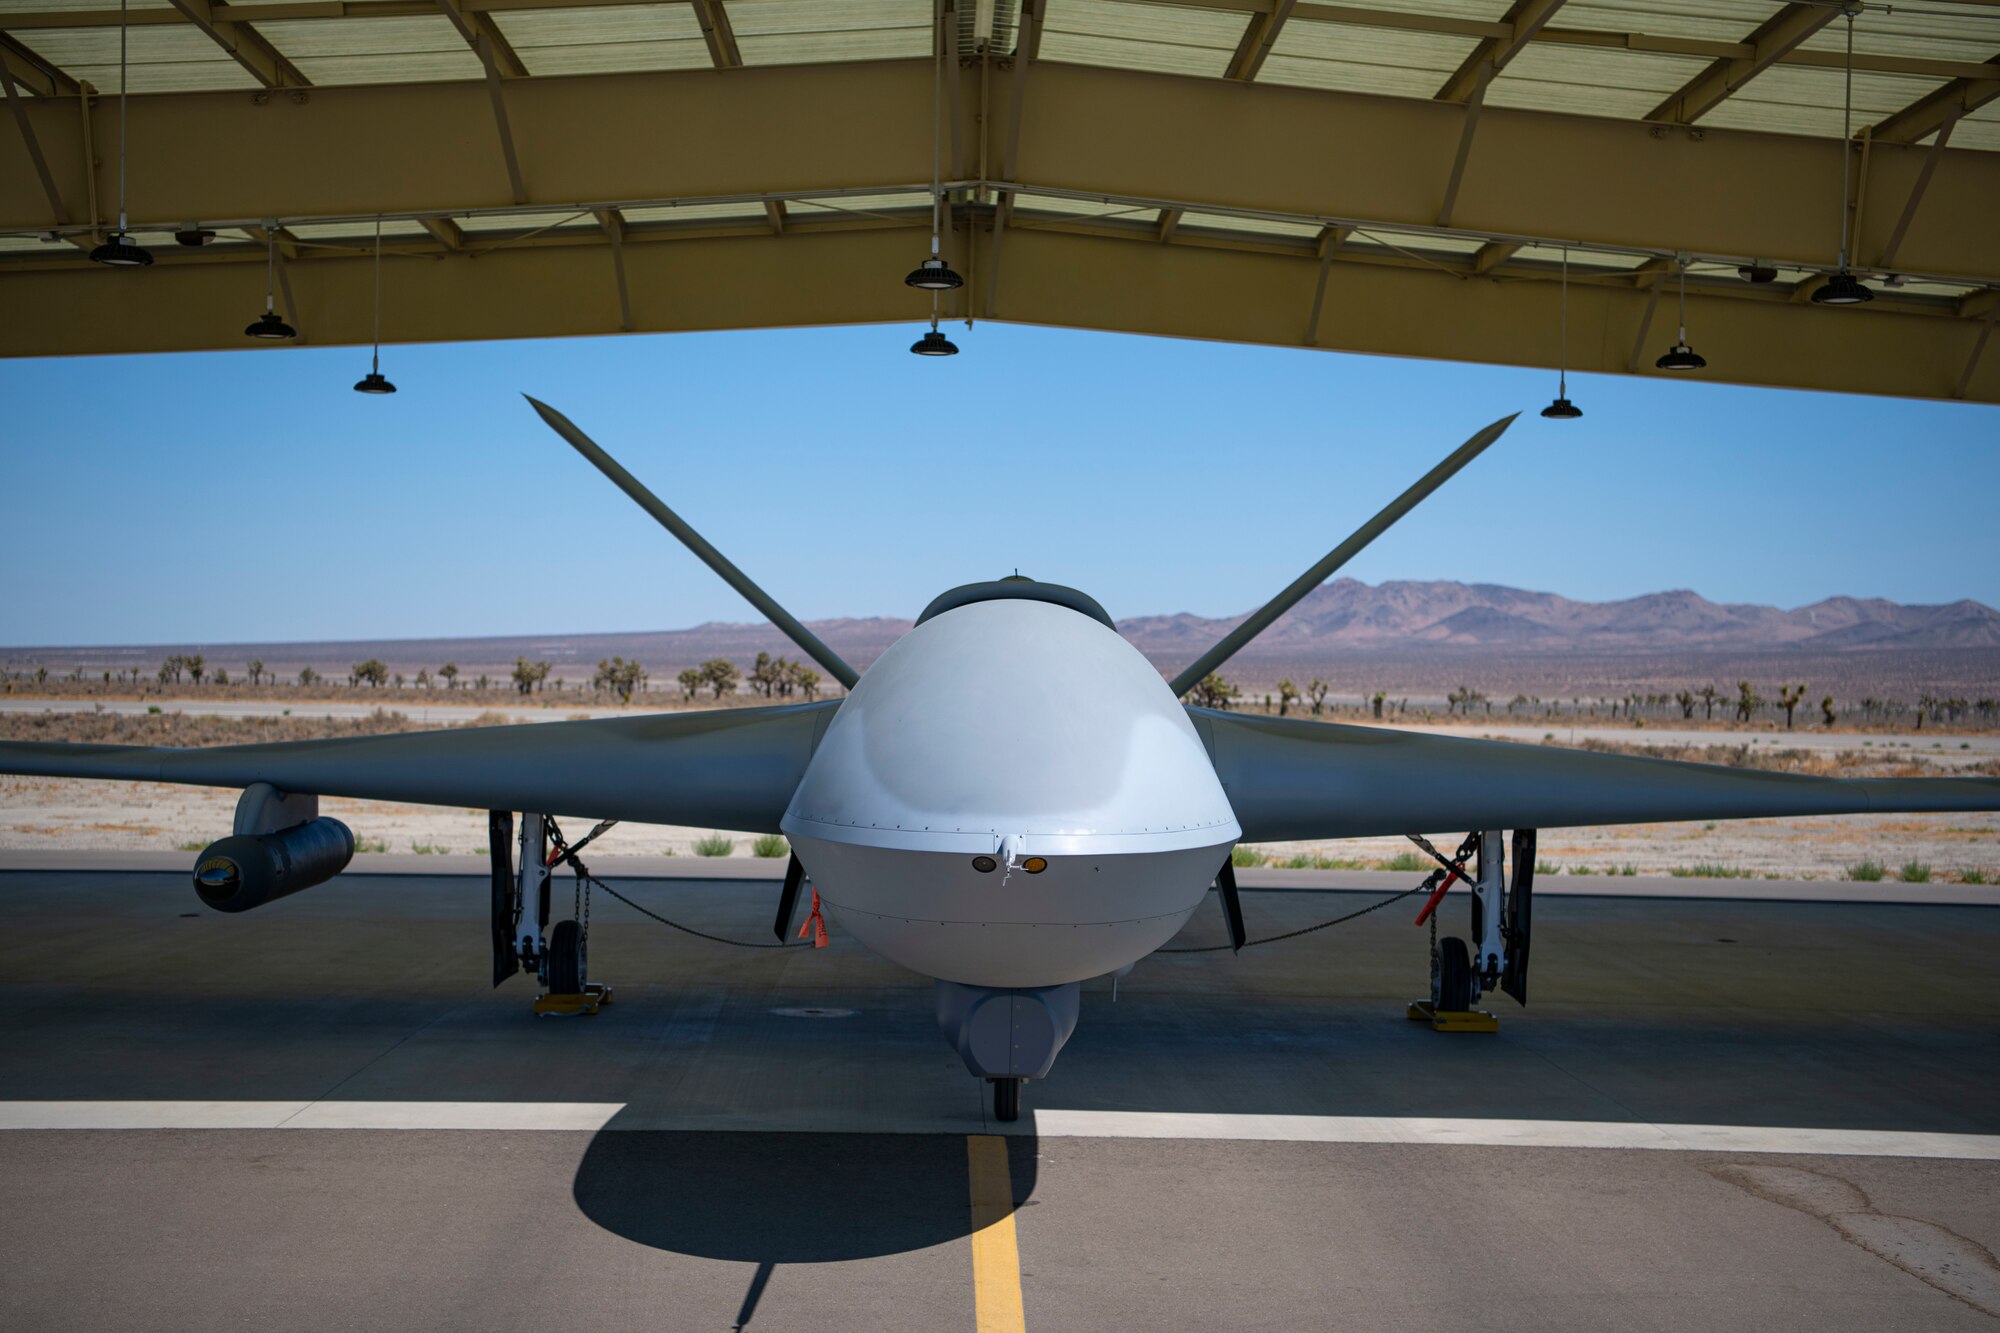 A General Atomics MQ-20 Avenger unmanned vehicle prepares for taxi at El Mirage Airfield, Calif. June 24, 2021